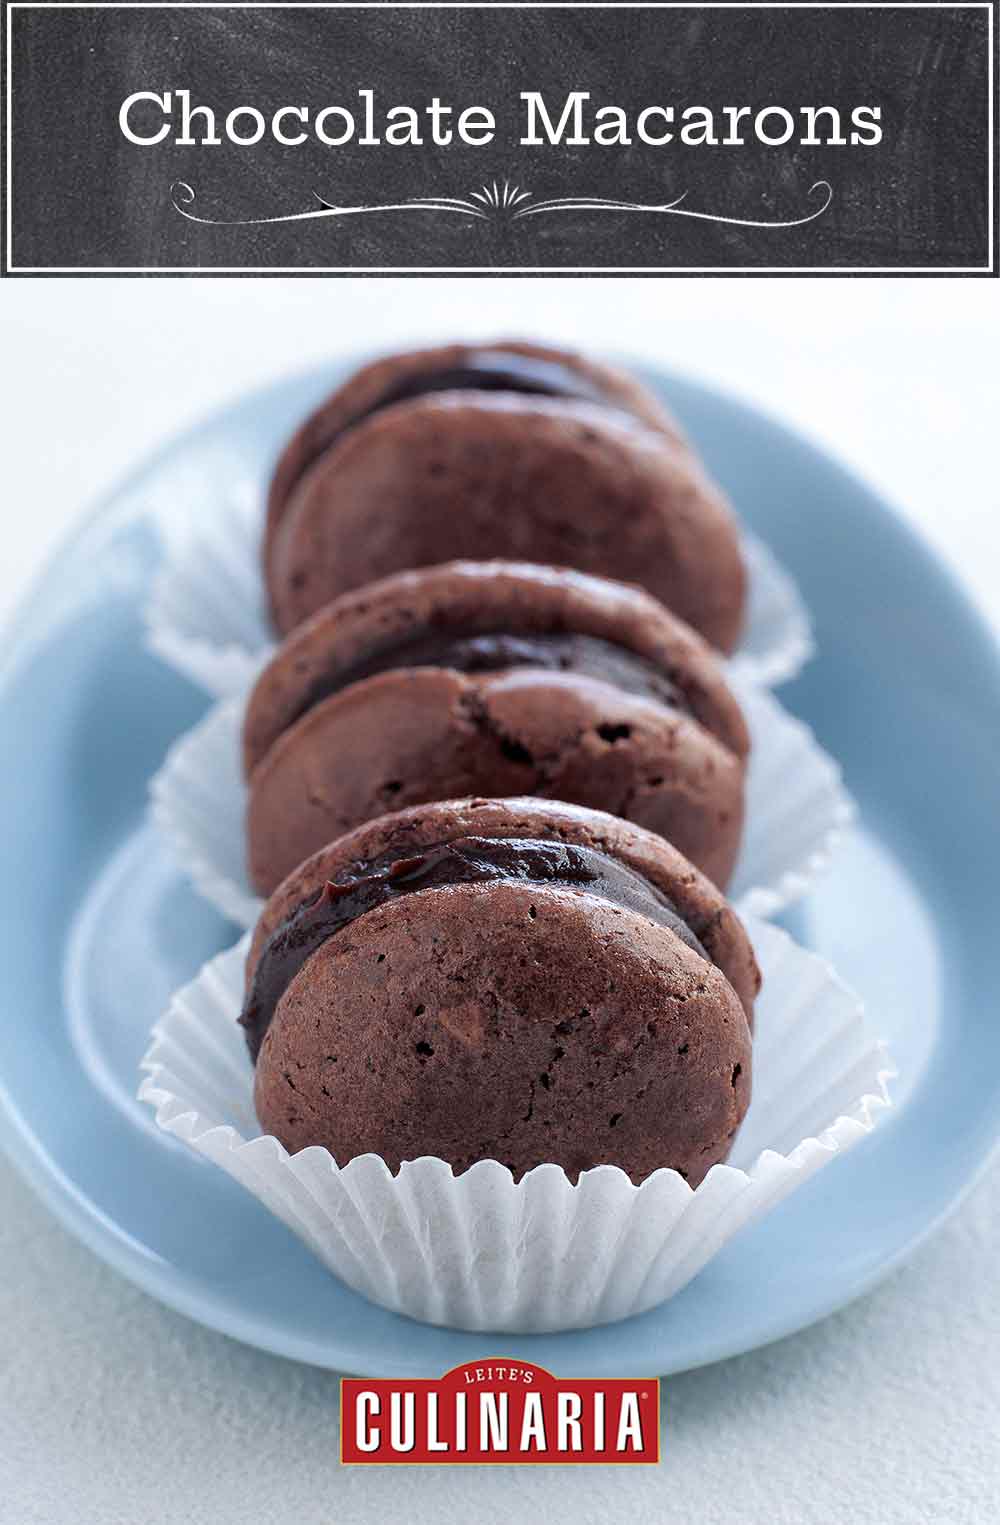 Three chocolate macarons in paper wrappers in a blue dish.